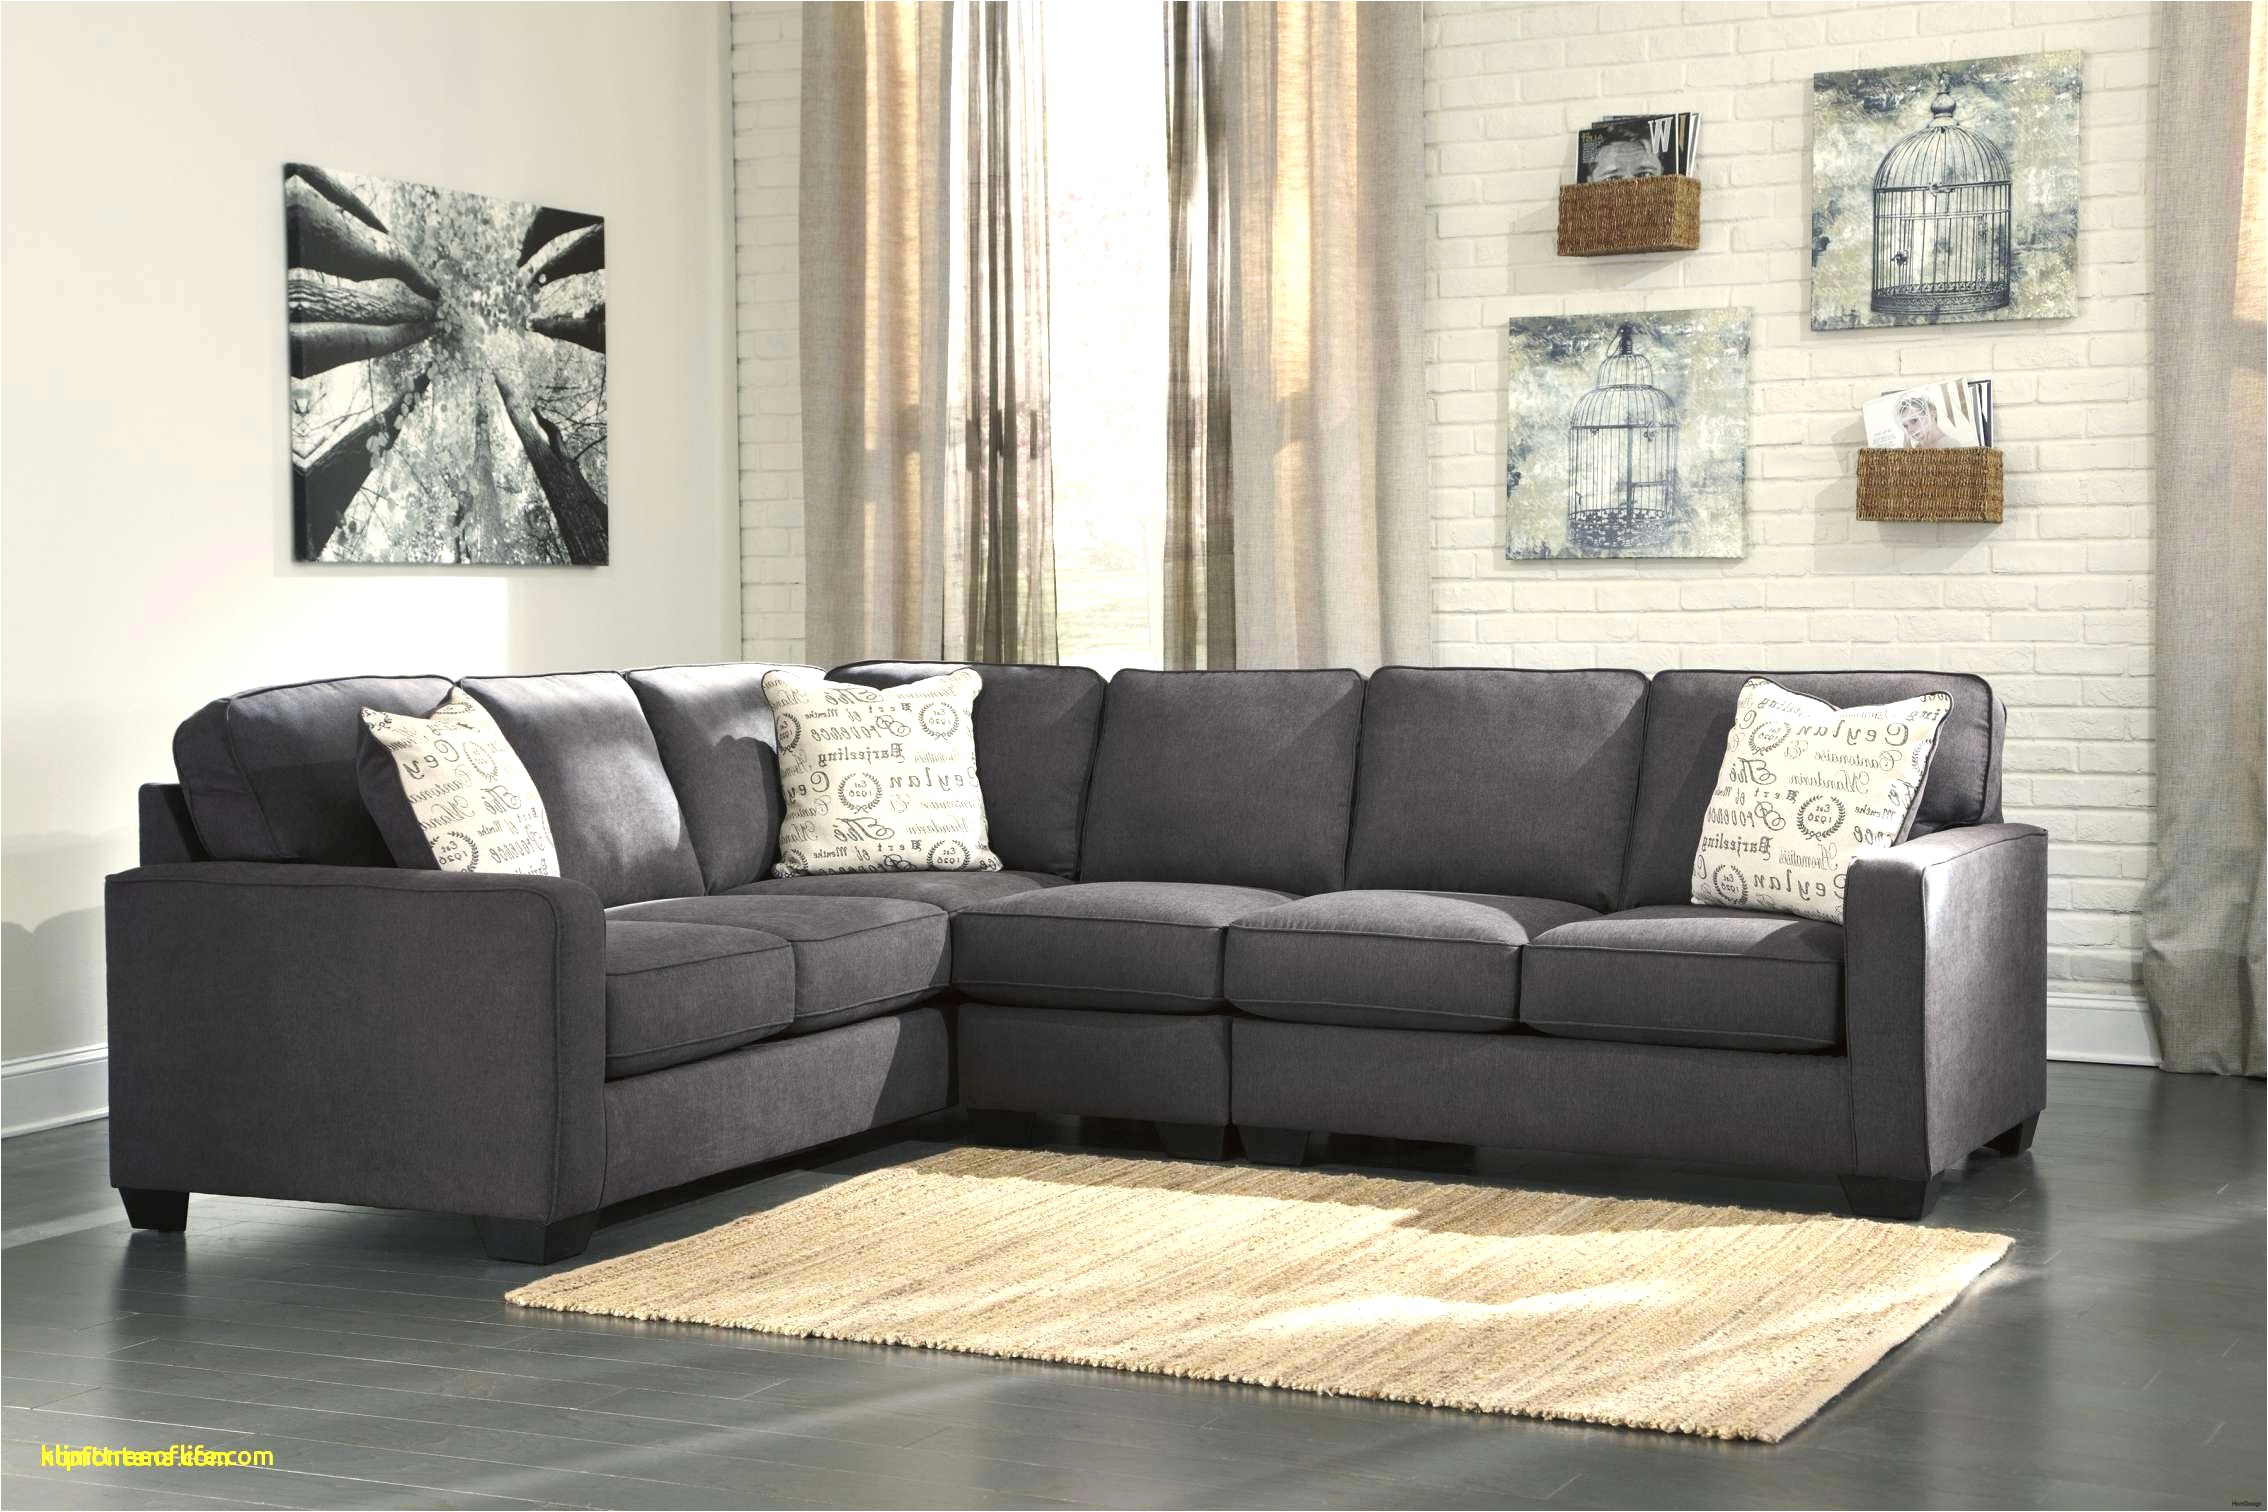 alenya flip charcoal sectional home design 3 piece sofa 0d 30 lovely small living room